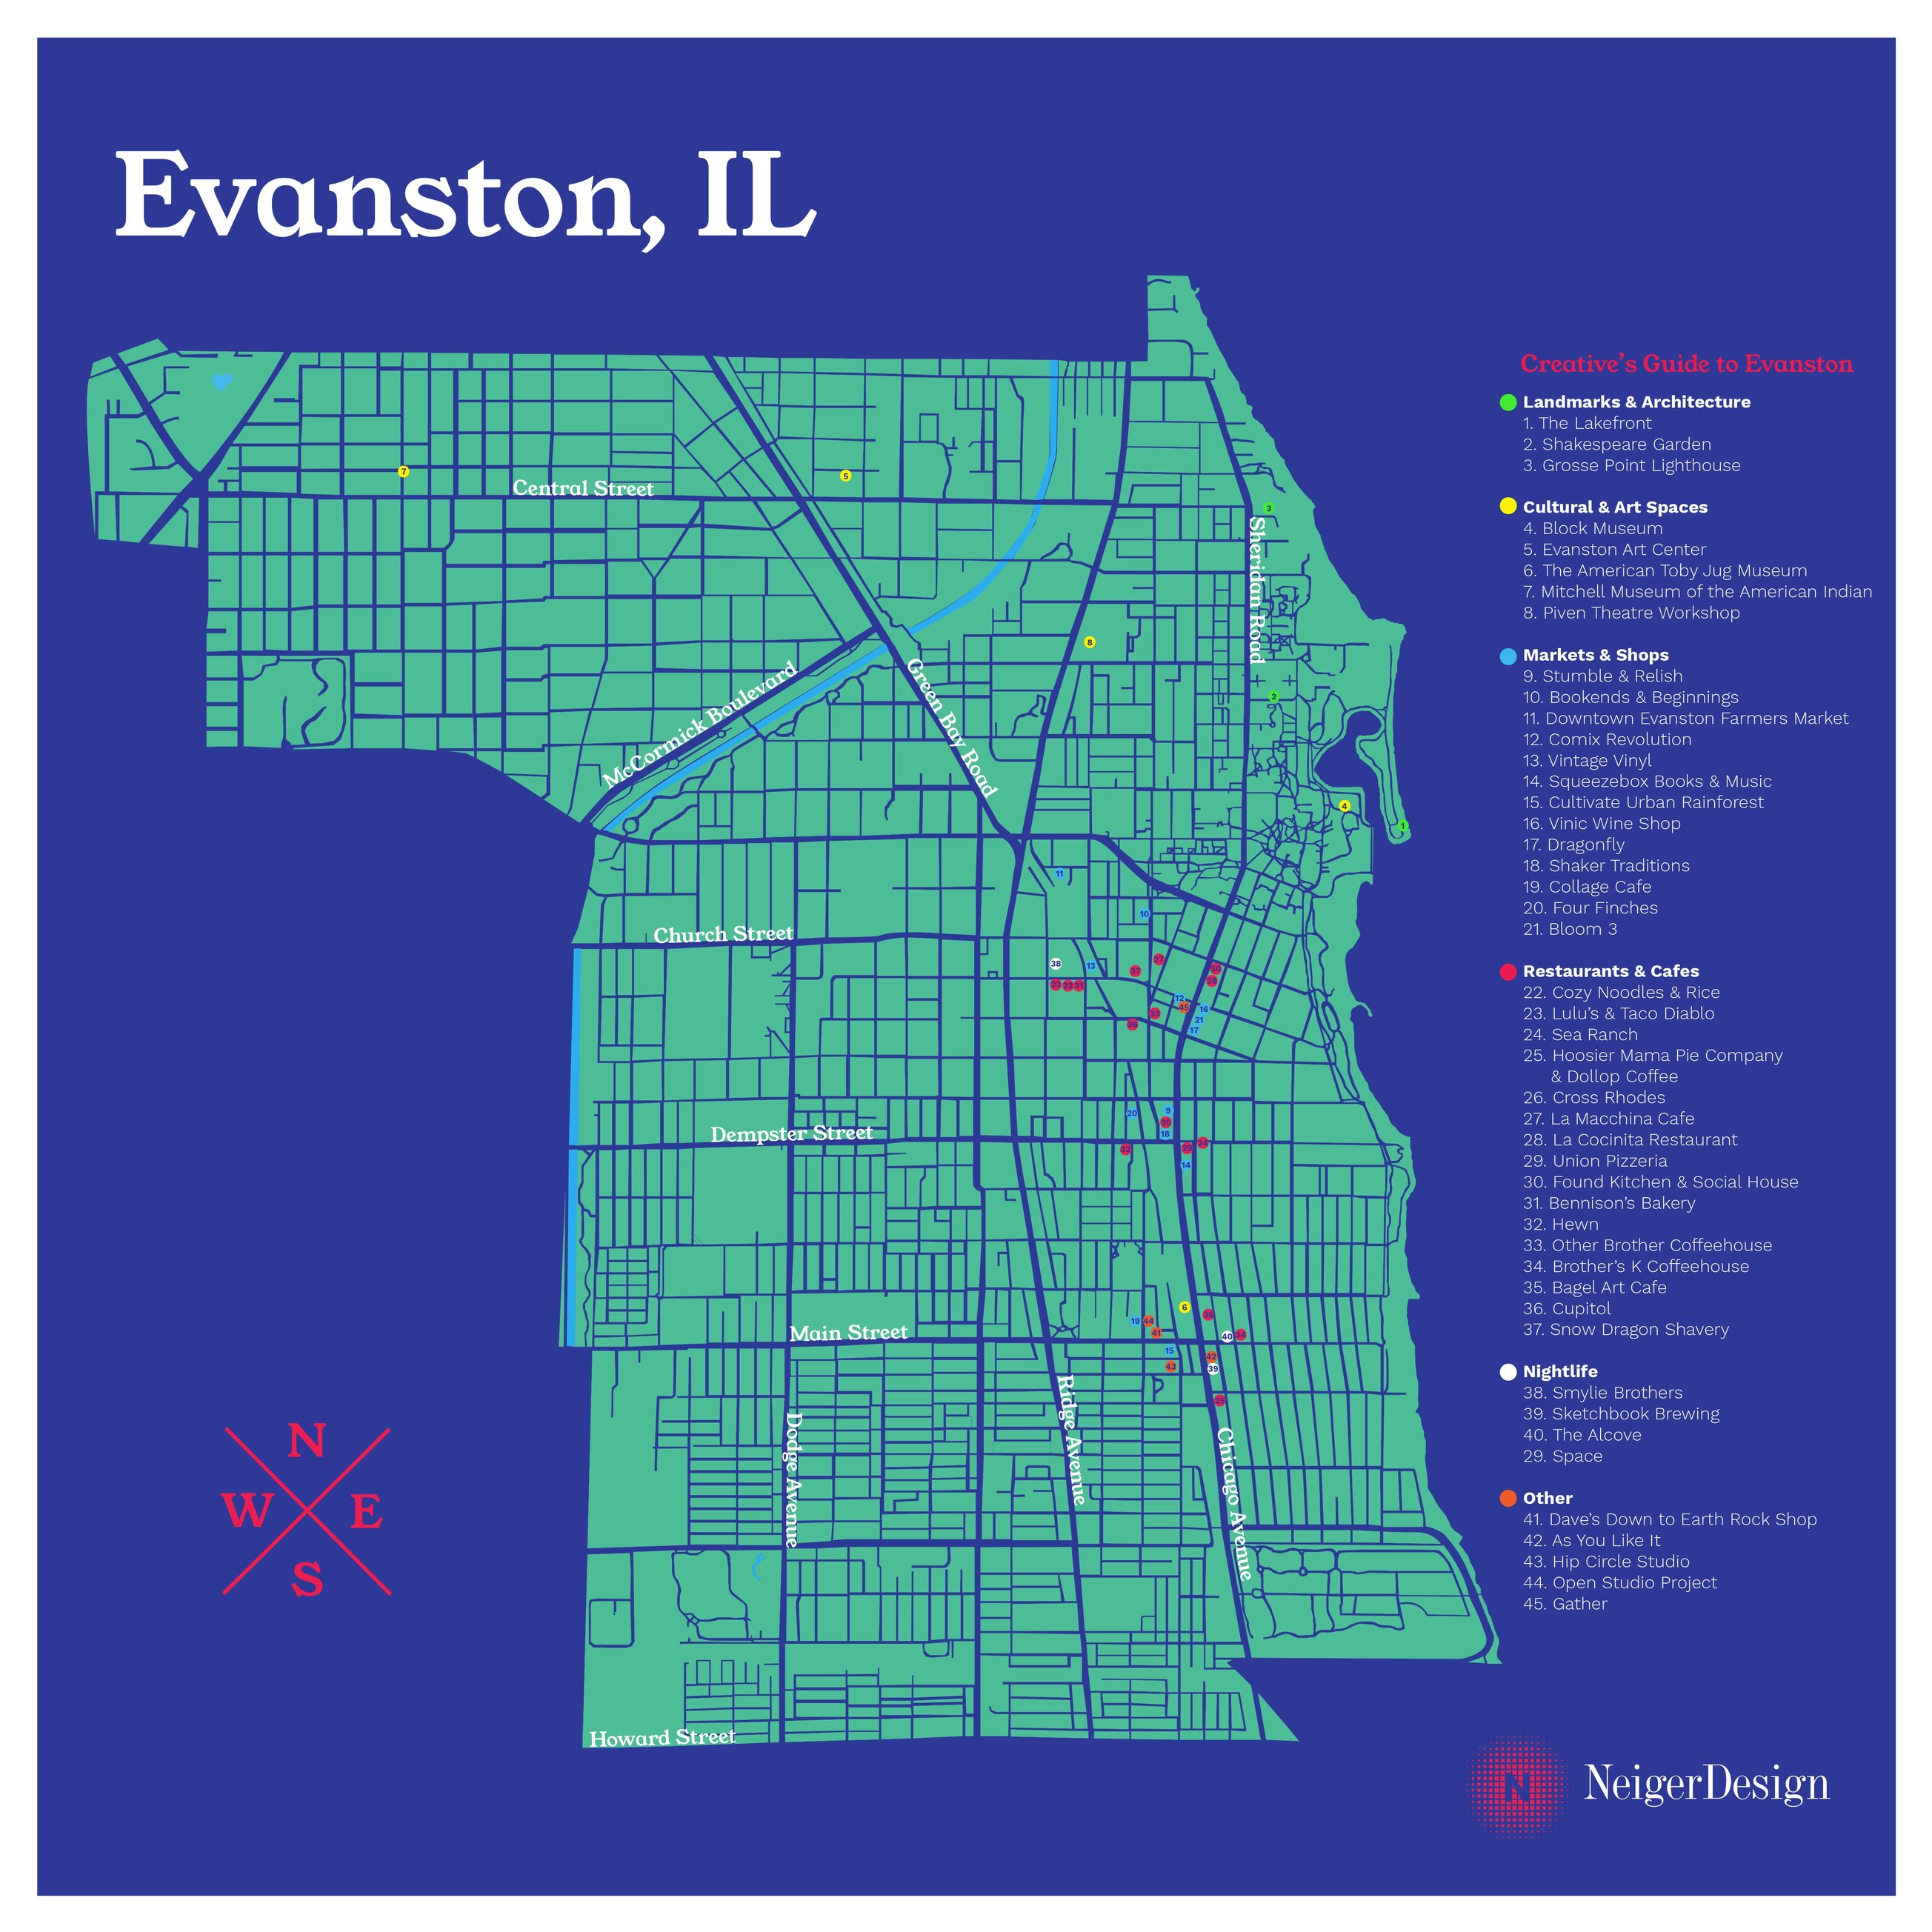 Creative's Guide to Evanston Illustrated Map of Evanston